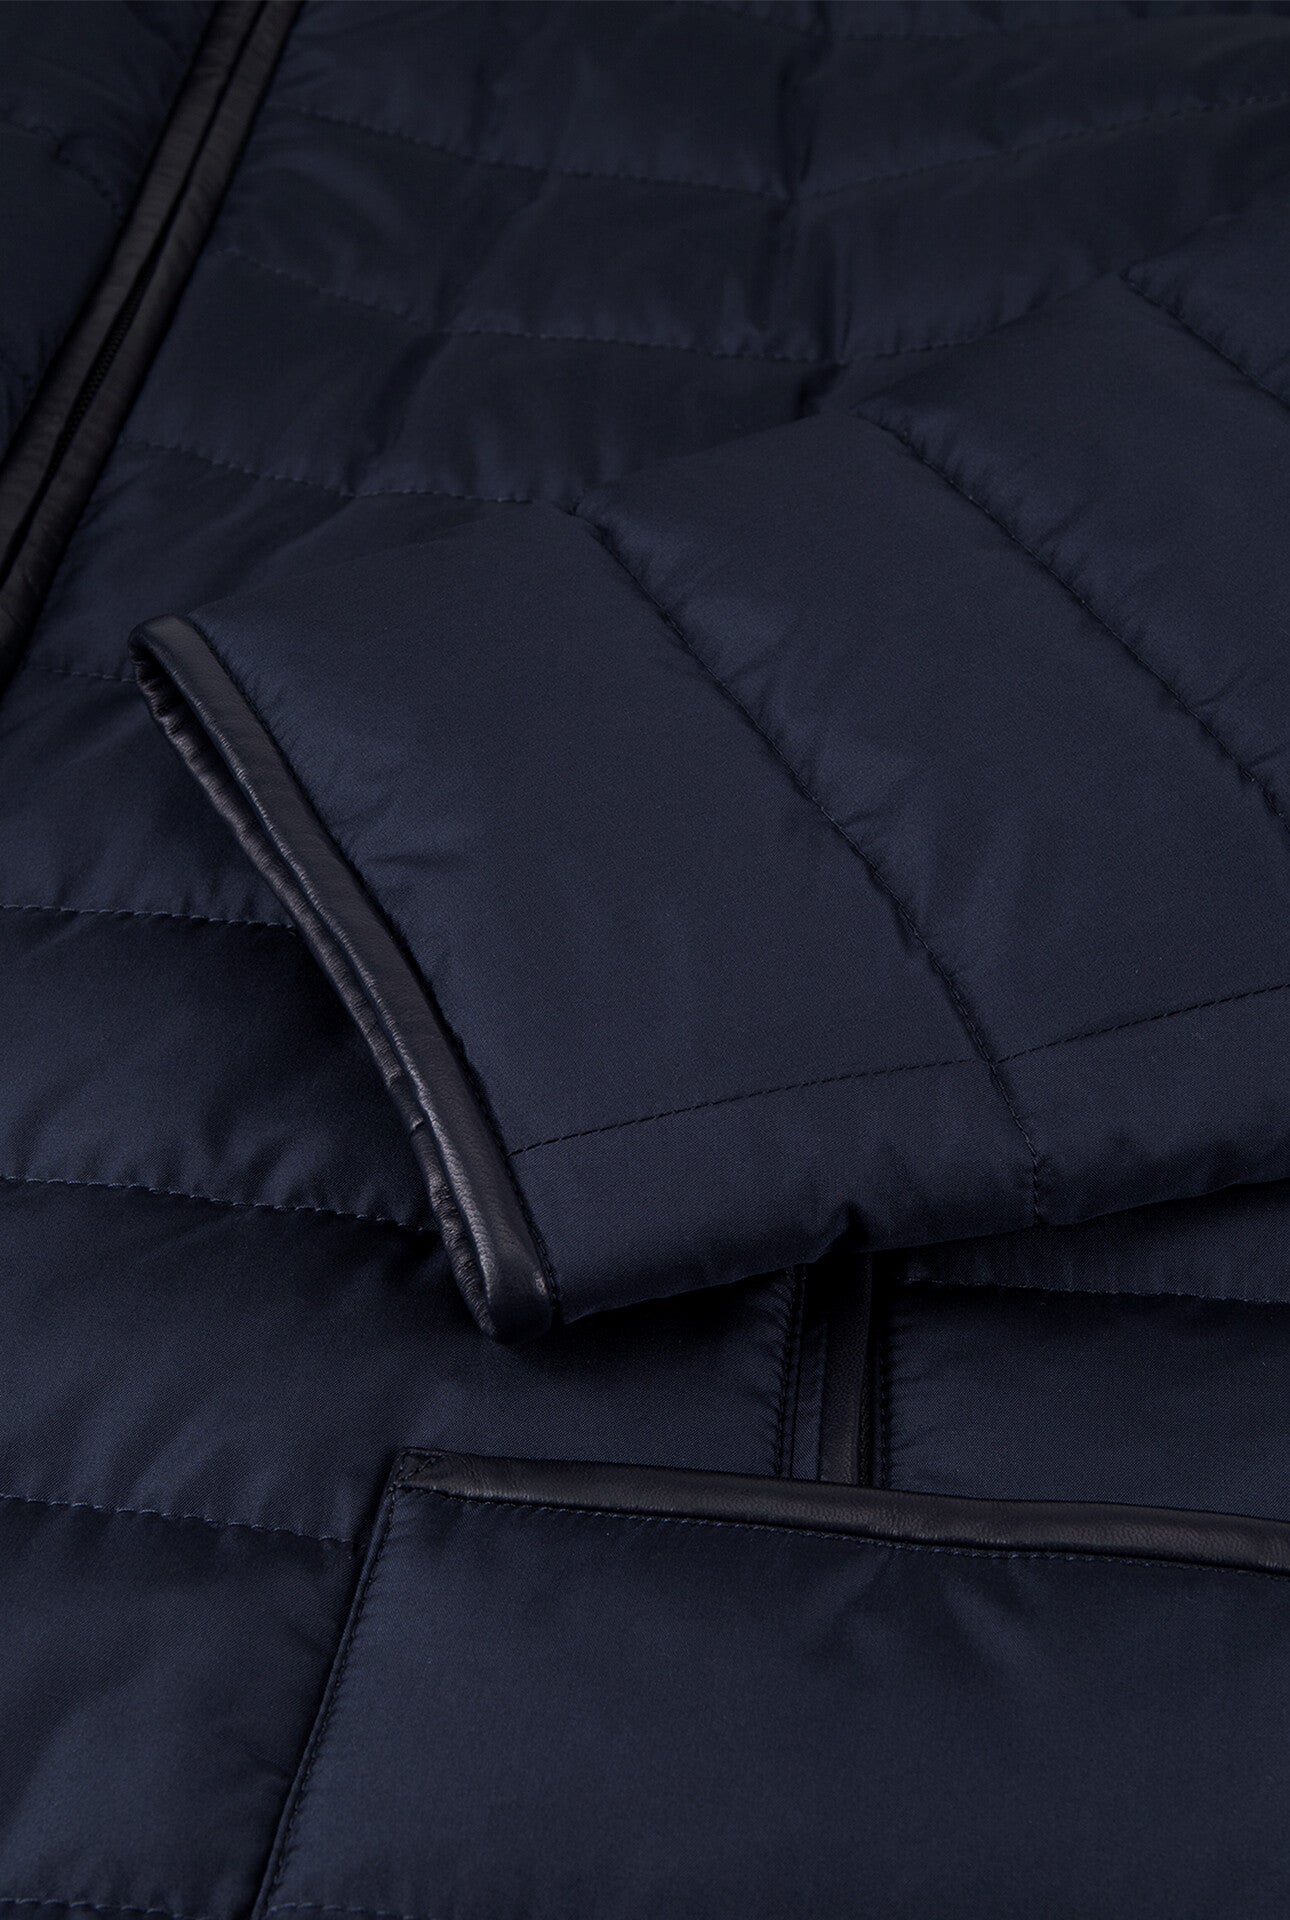 Zilli Cubic Parka in Navy With Lambskin Details